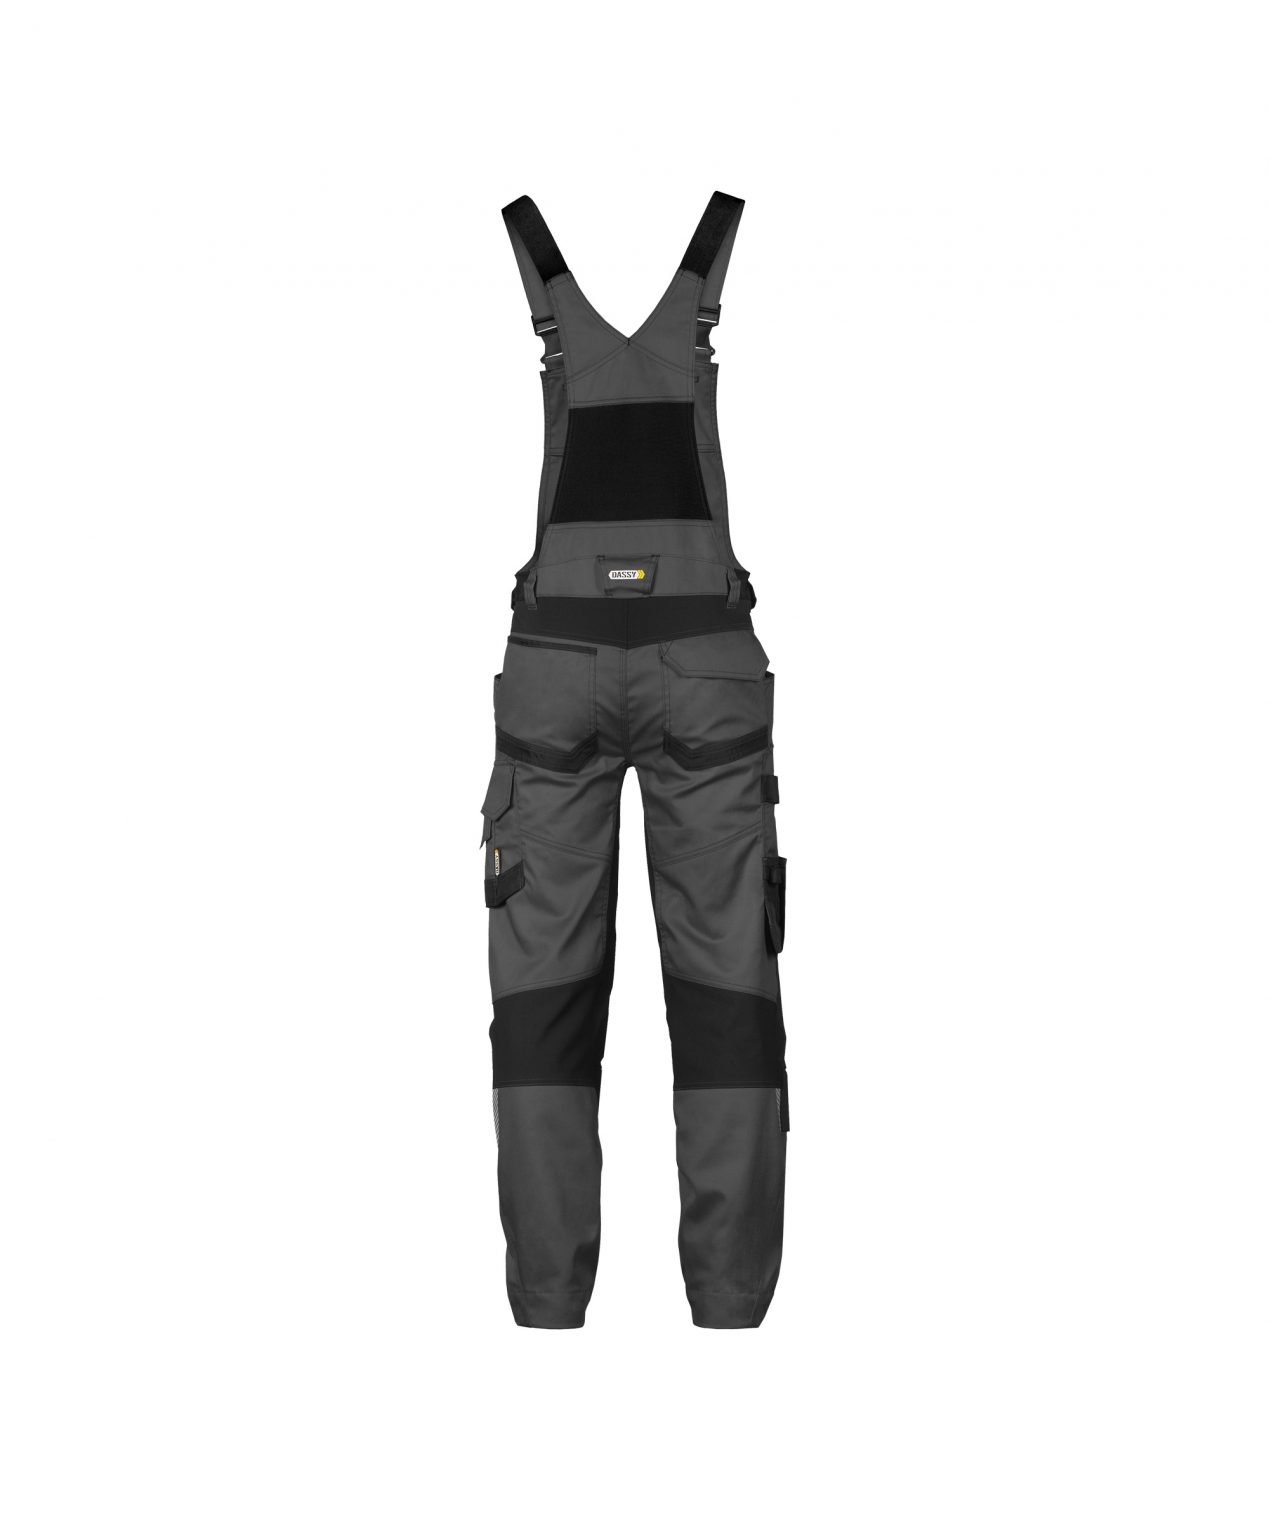 tronix brace overall with stretch and knee pockets anthracite grey black back